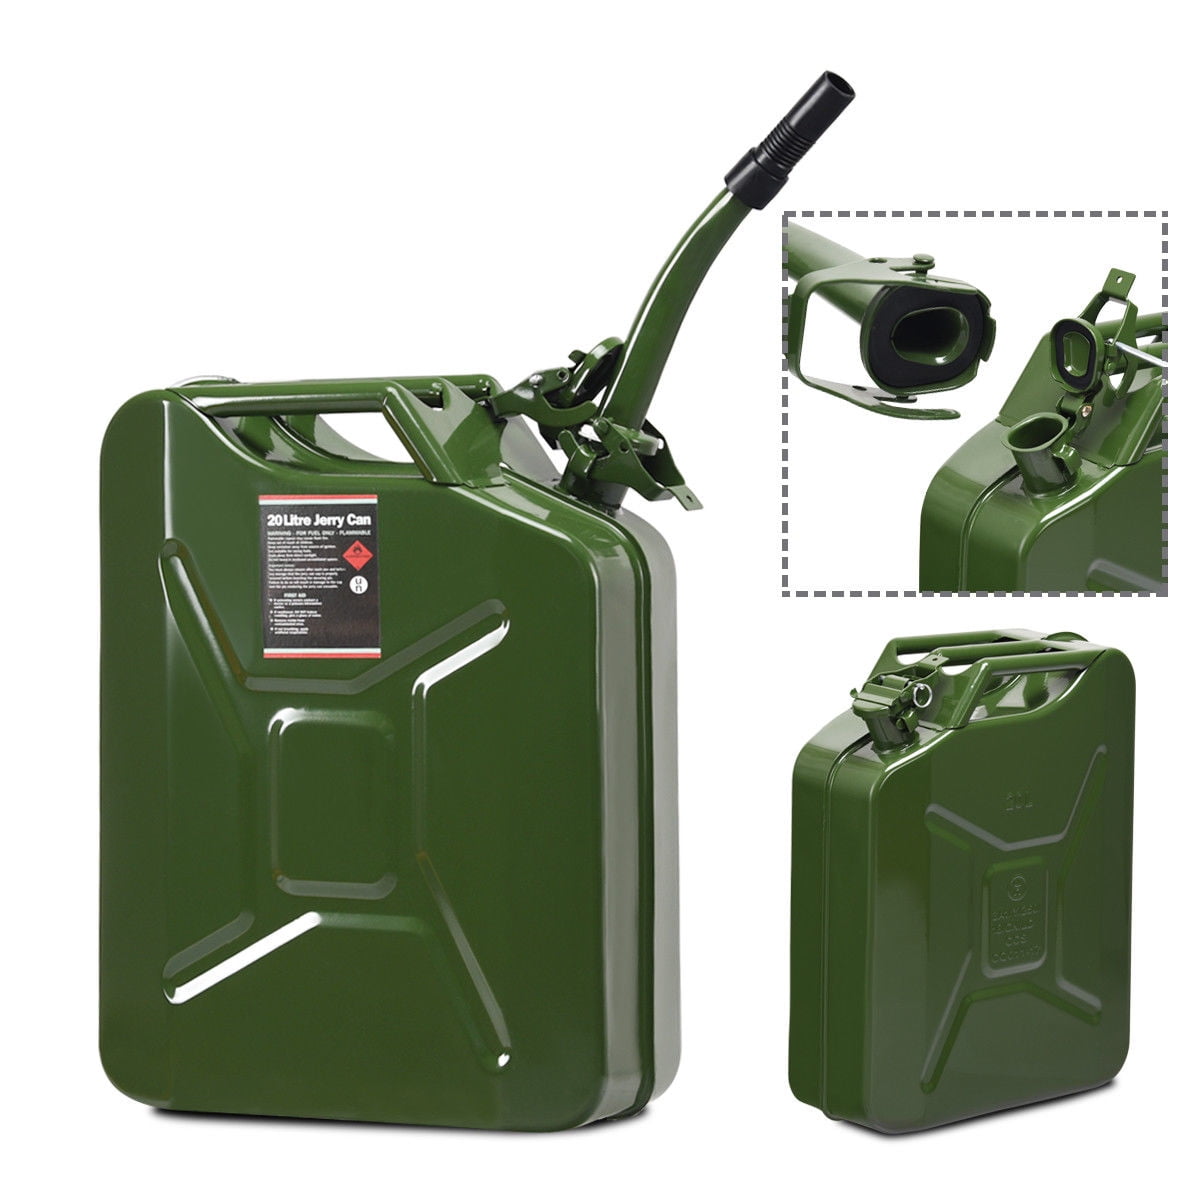 Green Jerry Can Gasoline Fuel Can Steel Tank 5 Gallon 20L Emergency Backup 